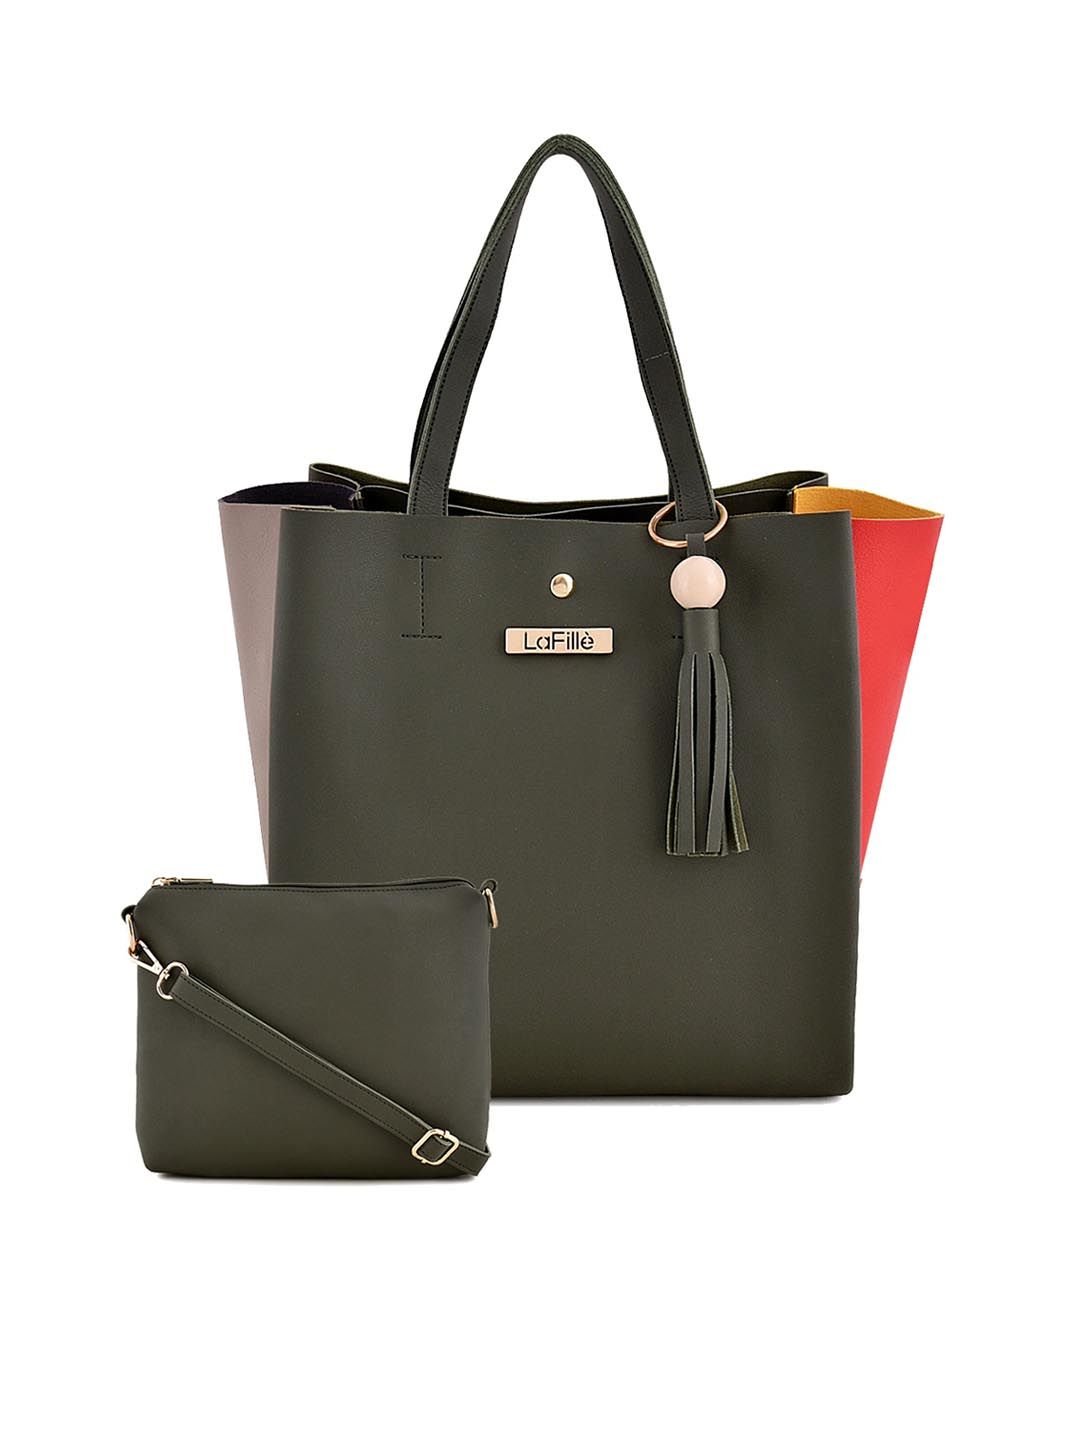 LaFille Green PU Structured Tote Bag with Tasselled Price in India